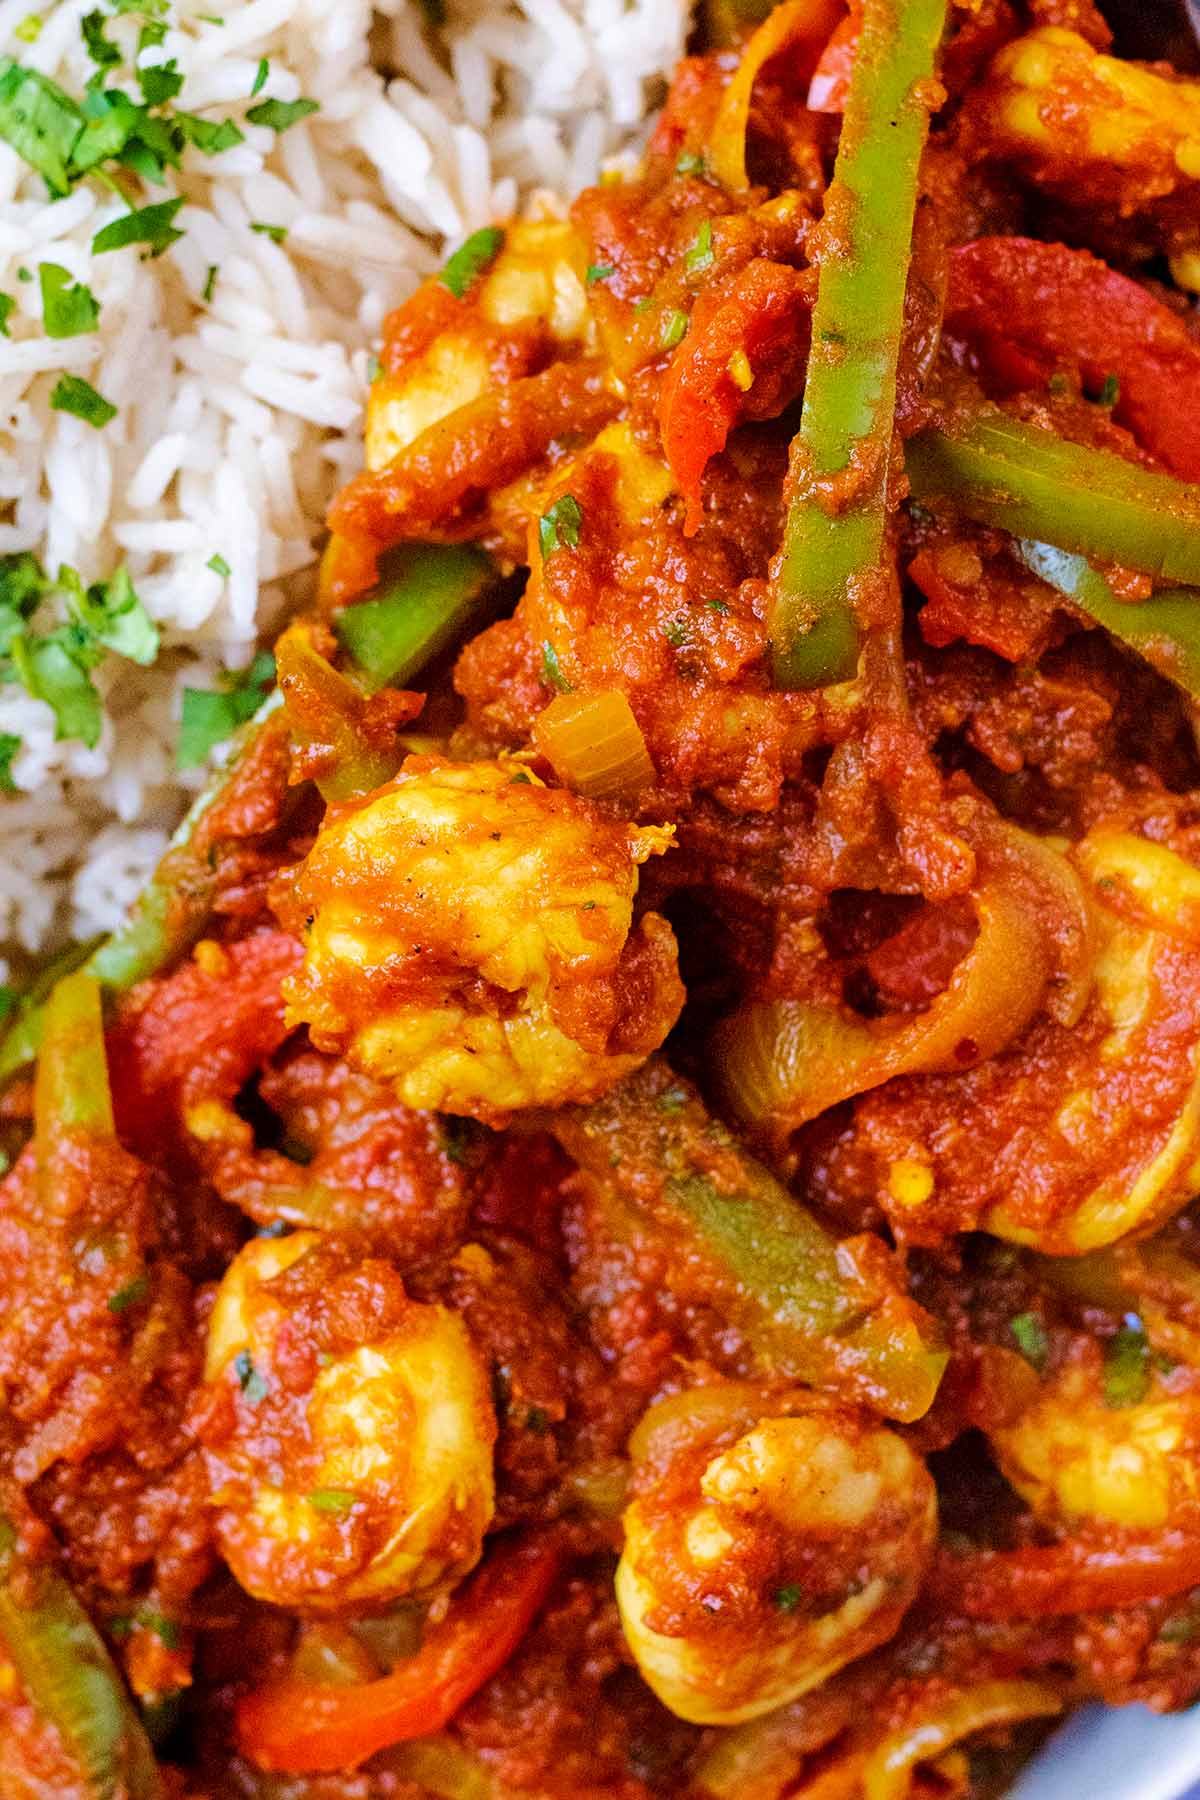 Cooked prawns and sliced peppers in a thick tomato based curry sauce.